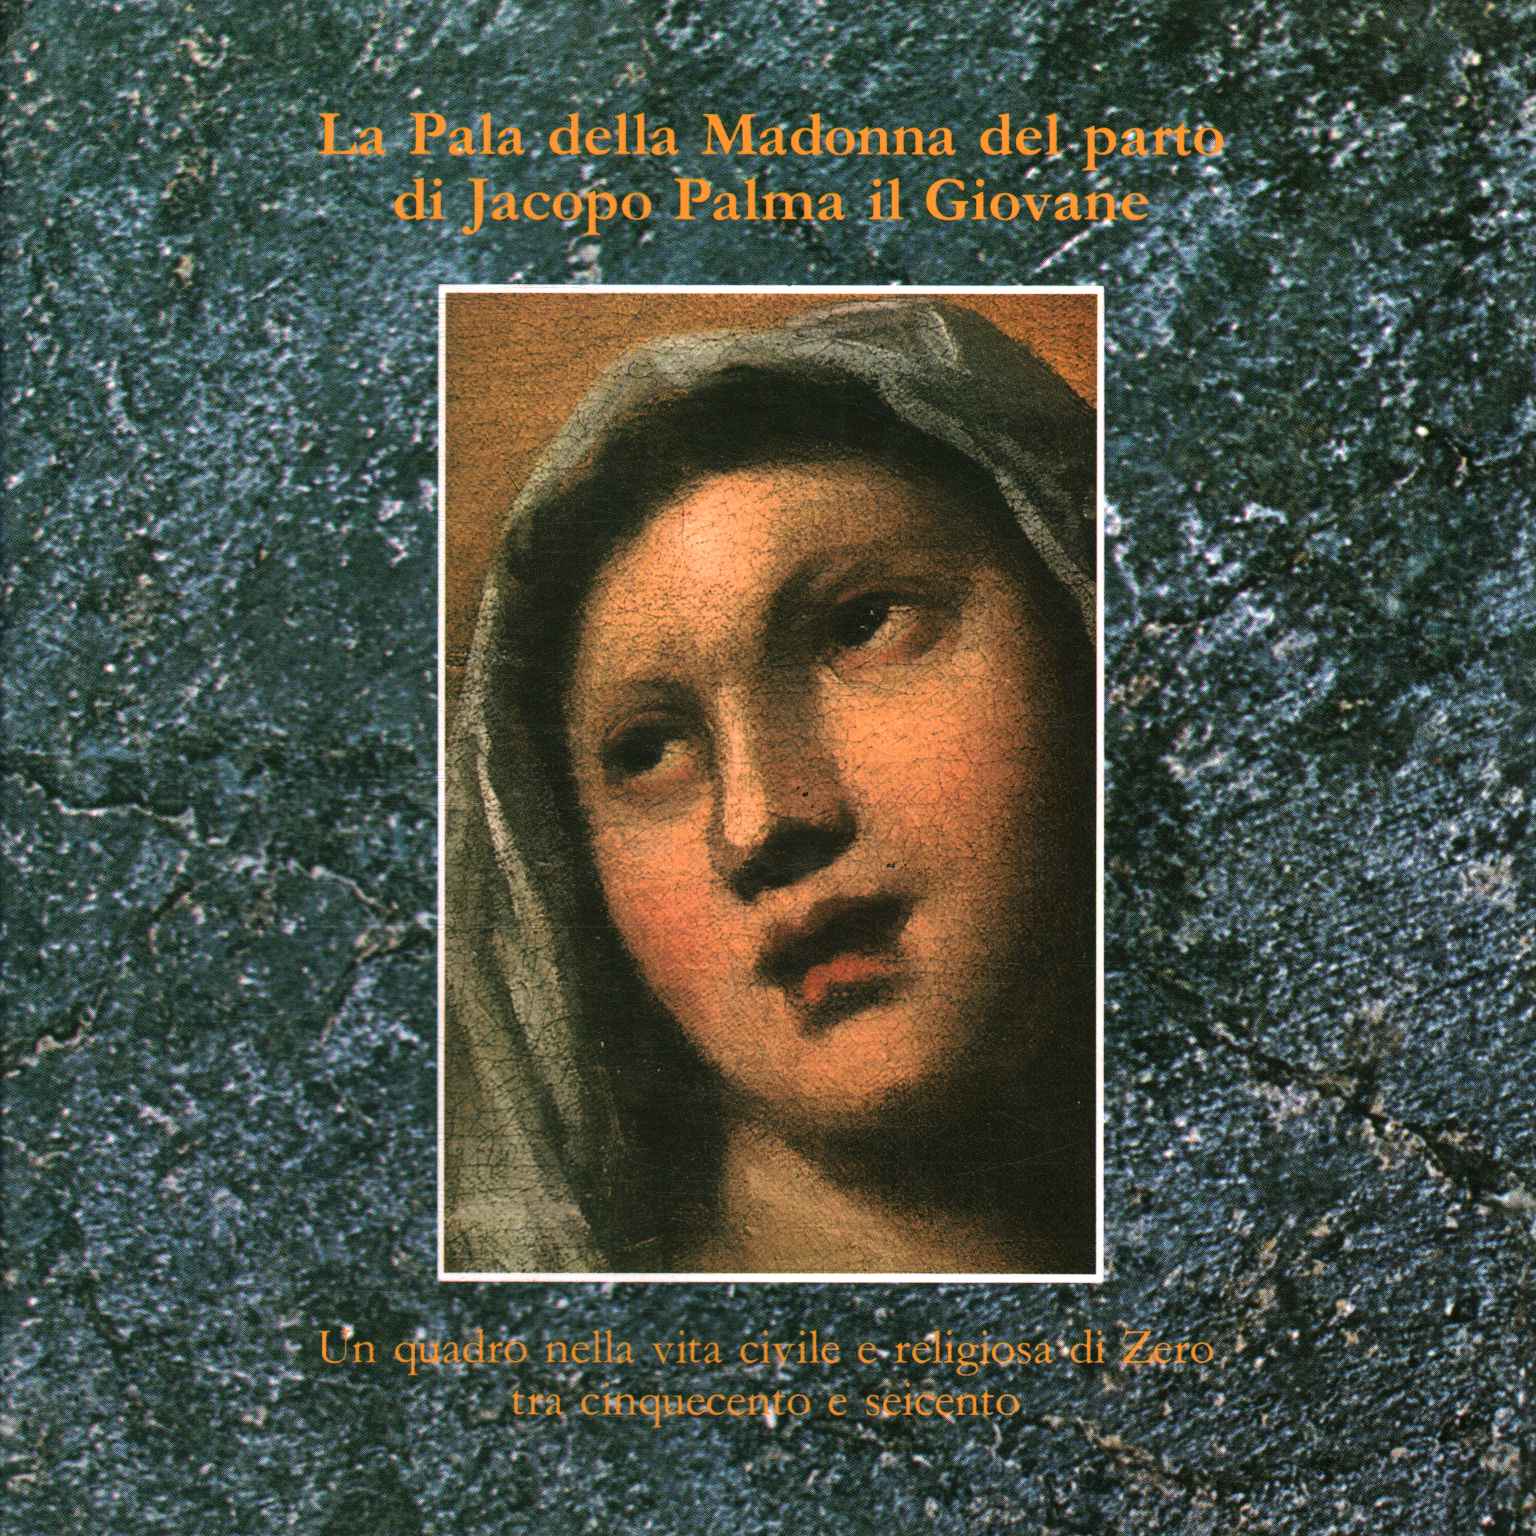 The Altarpiece of the Madonna del Parto by J